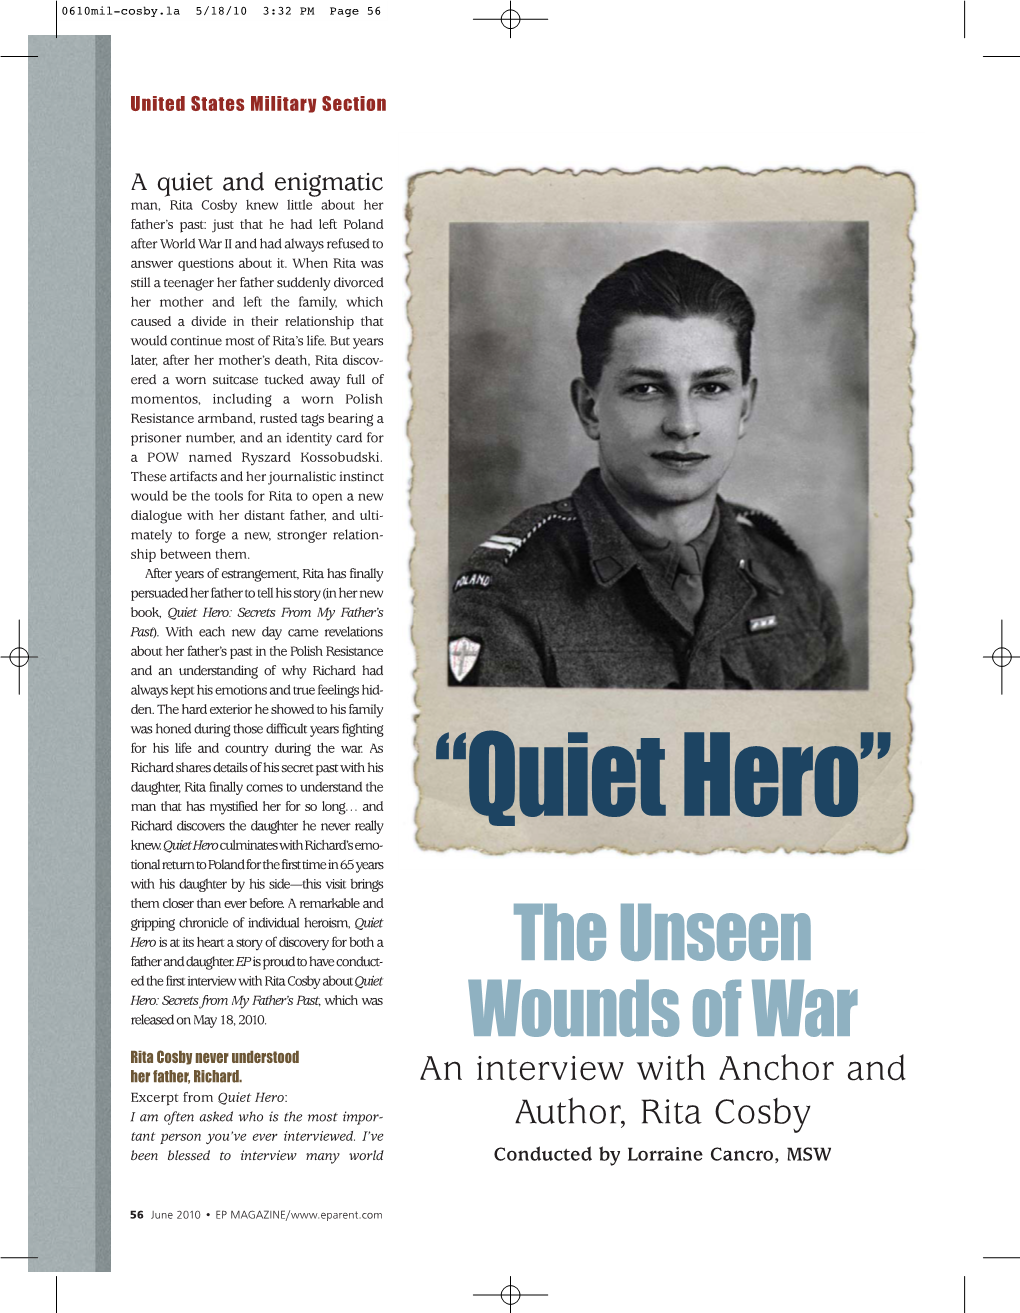 “Quiet Hero: Secrets from My Father's Past”